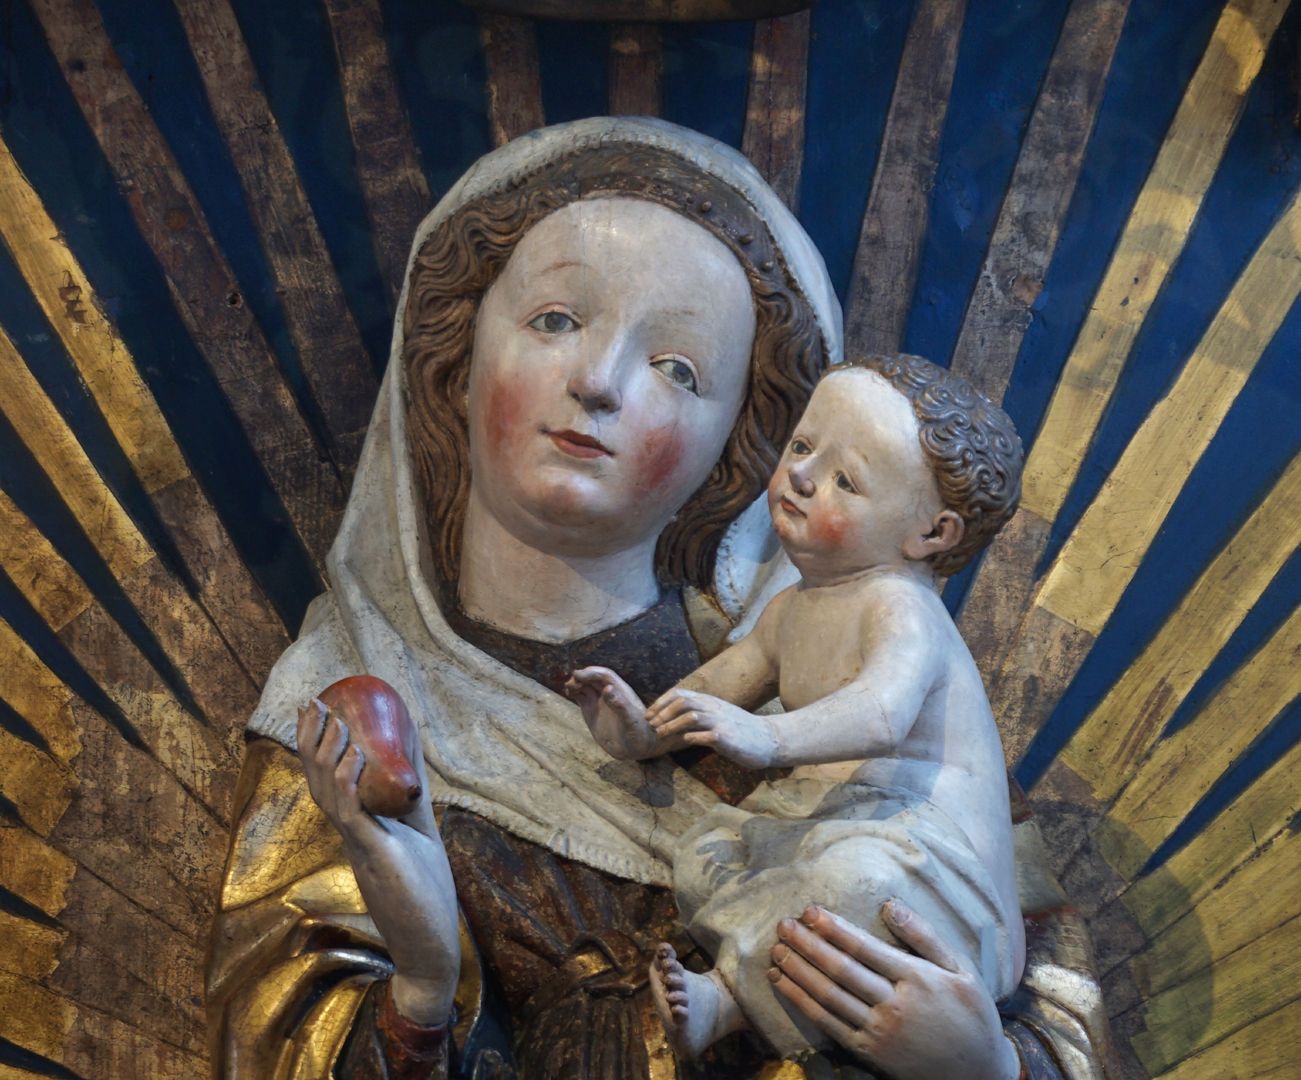 Altar of the Beautiful Mary Mary with the infant Jesus, holding a pear in her right hand